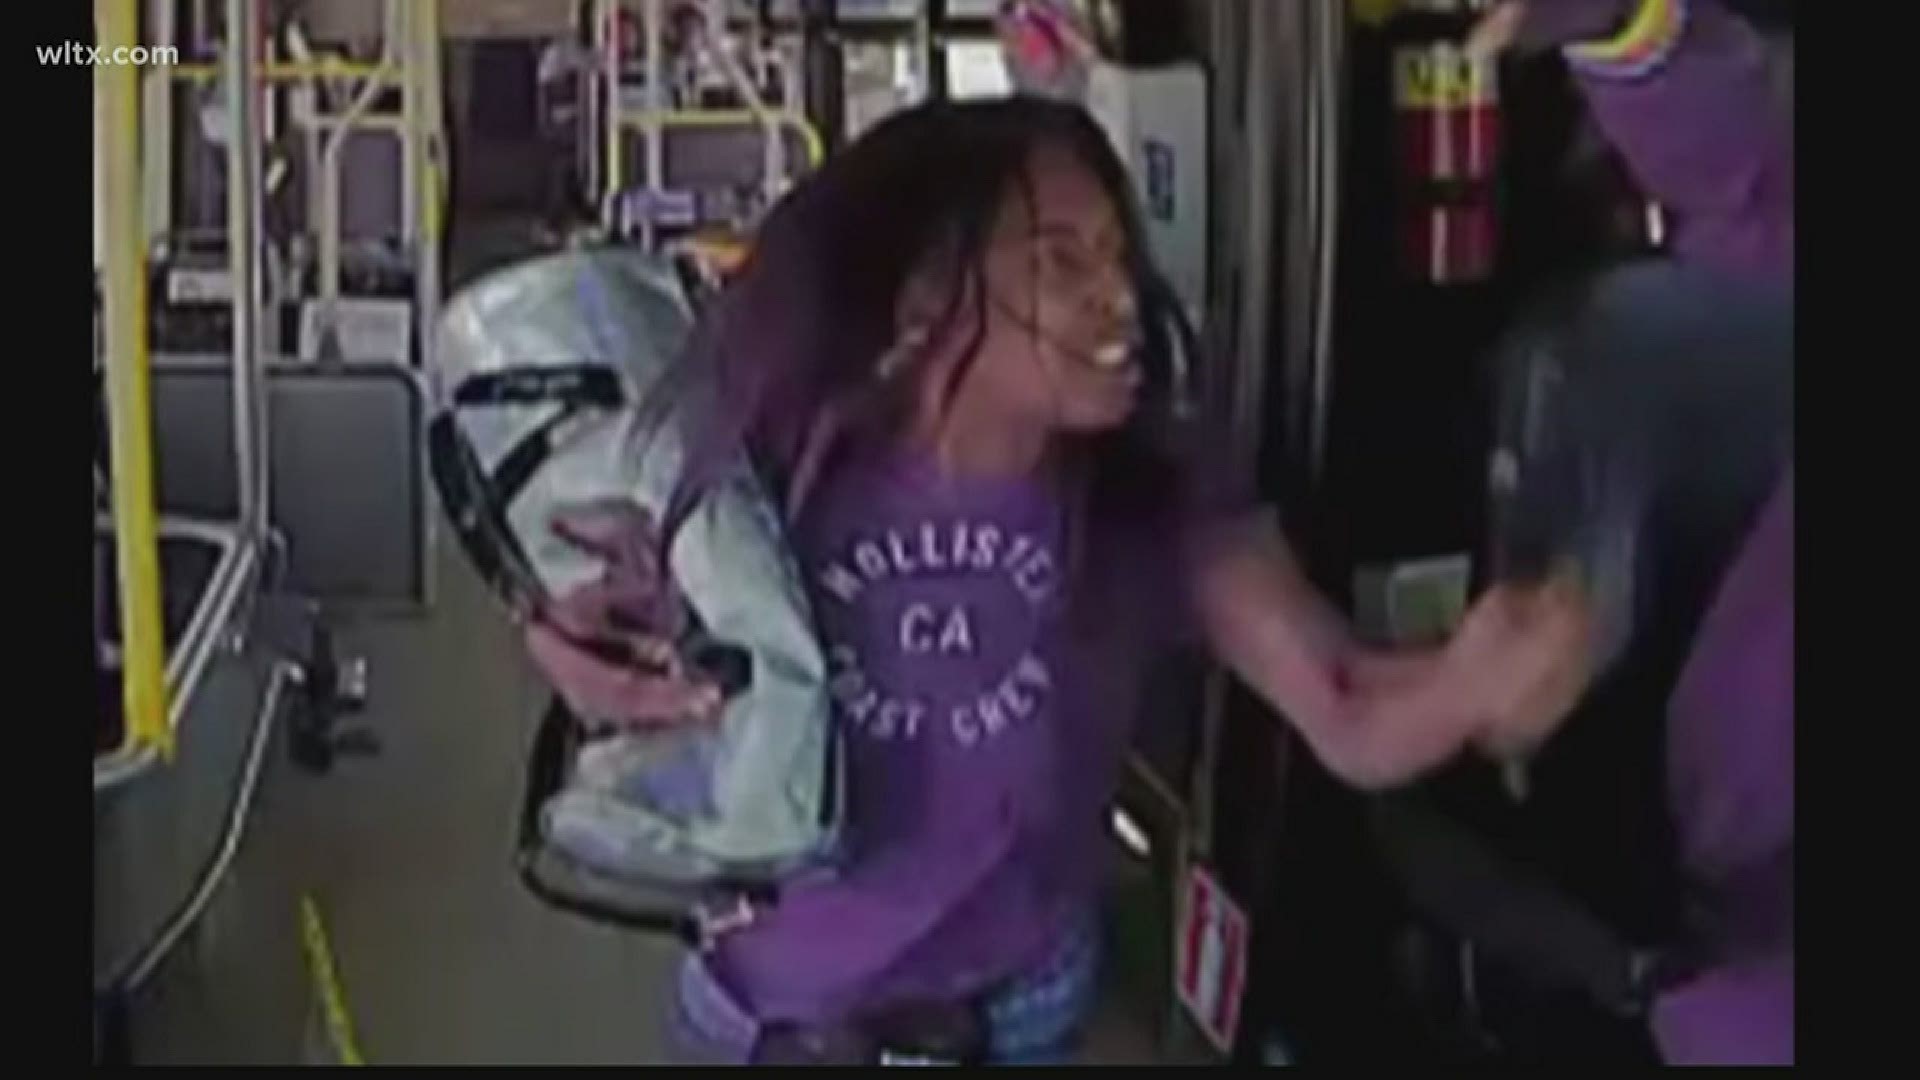 The Richland County Sheriff’s Department is seeking the public’s help identifying a woman who assaulted a Comet bus driver.